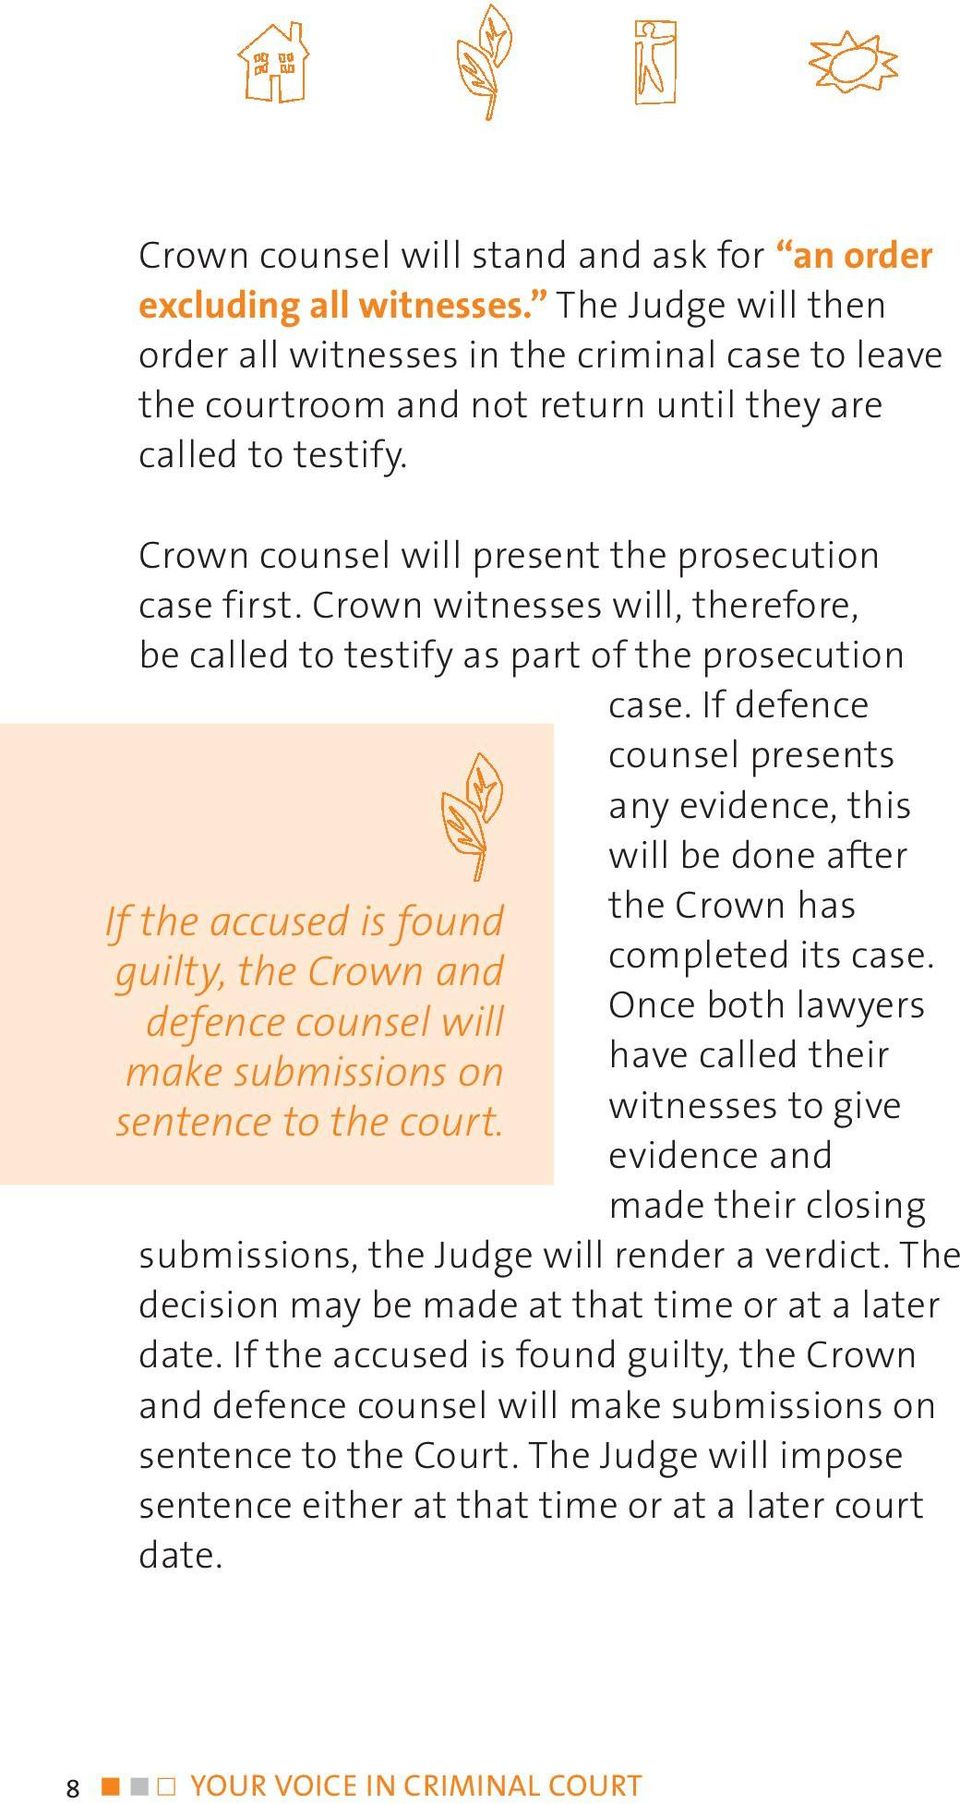 Crown witnesses will, therefore, be called to testify as part of the prosecution case.